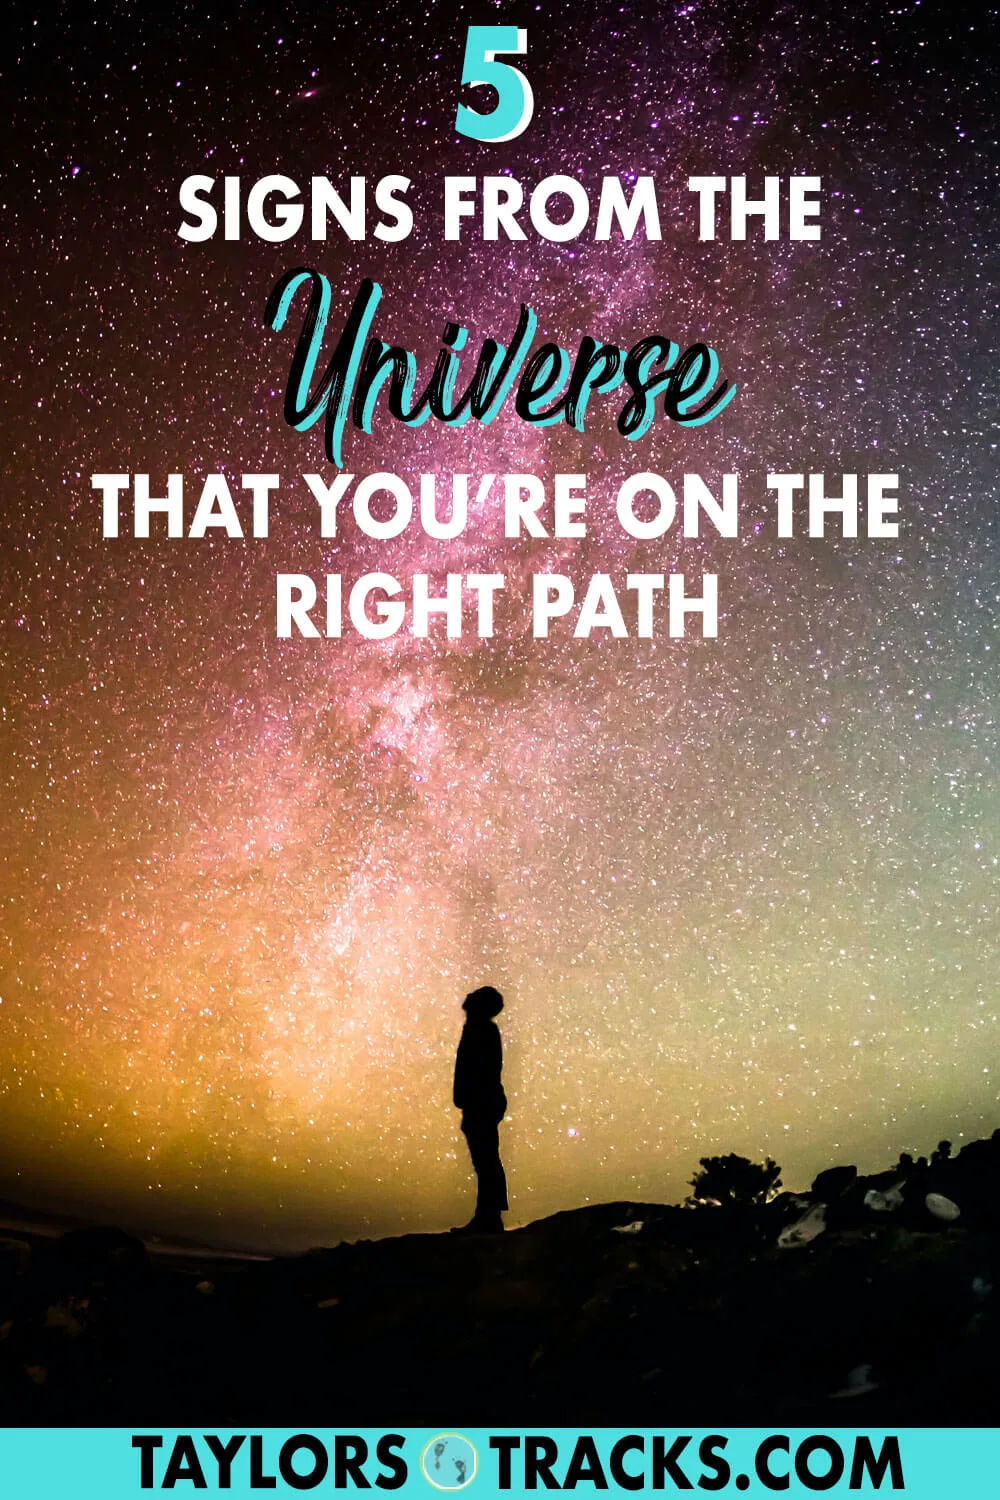 Have you ever wondered, “Am I on the right path?” If so, it’s time to get spiritual and look to see if you’re getting any signs from the universe. Click to find out ways that the universe communicates with you!